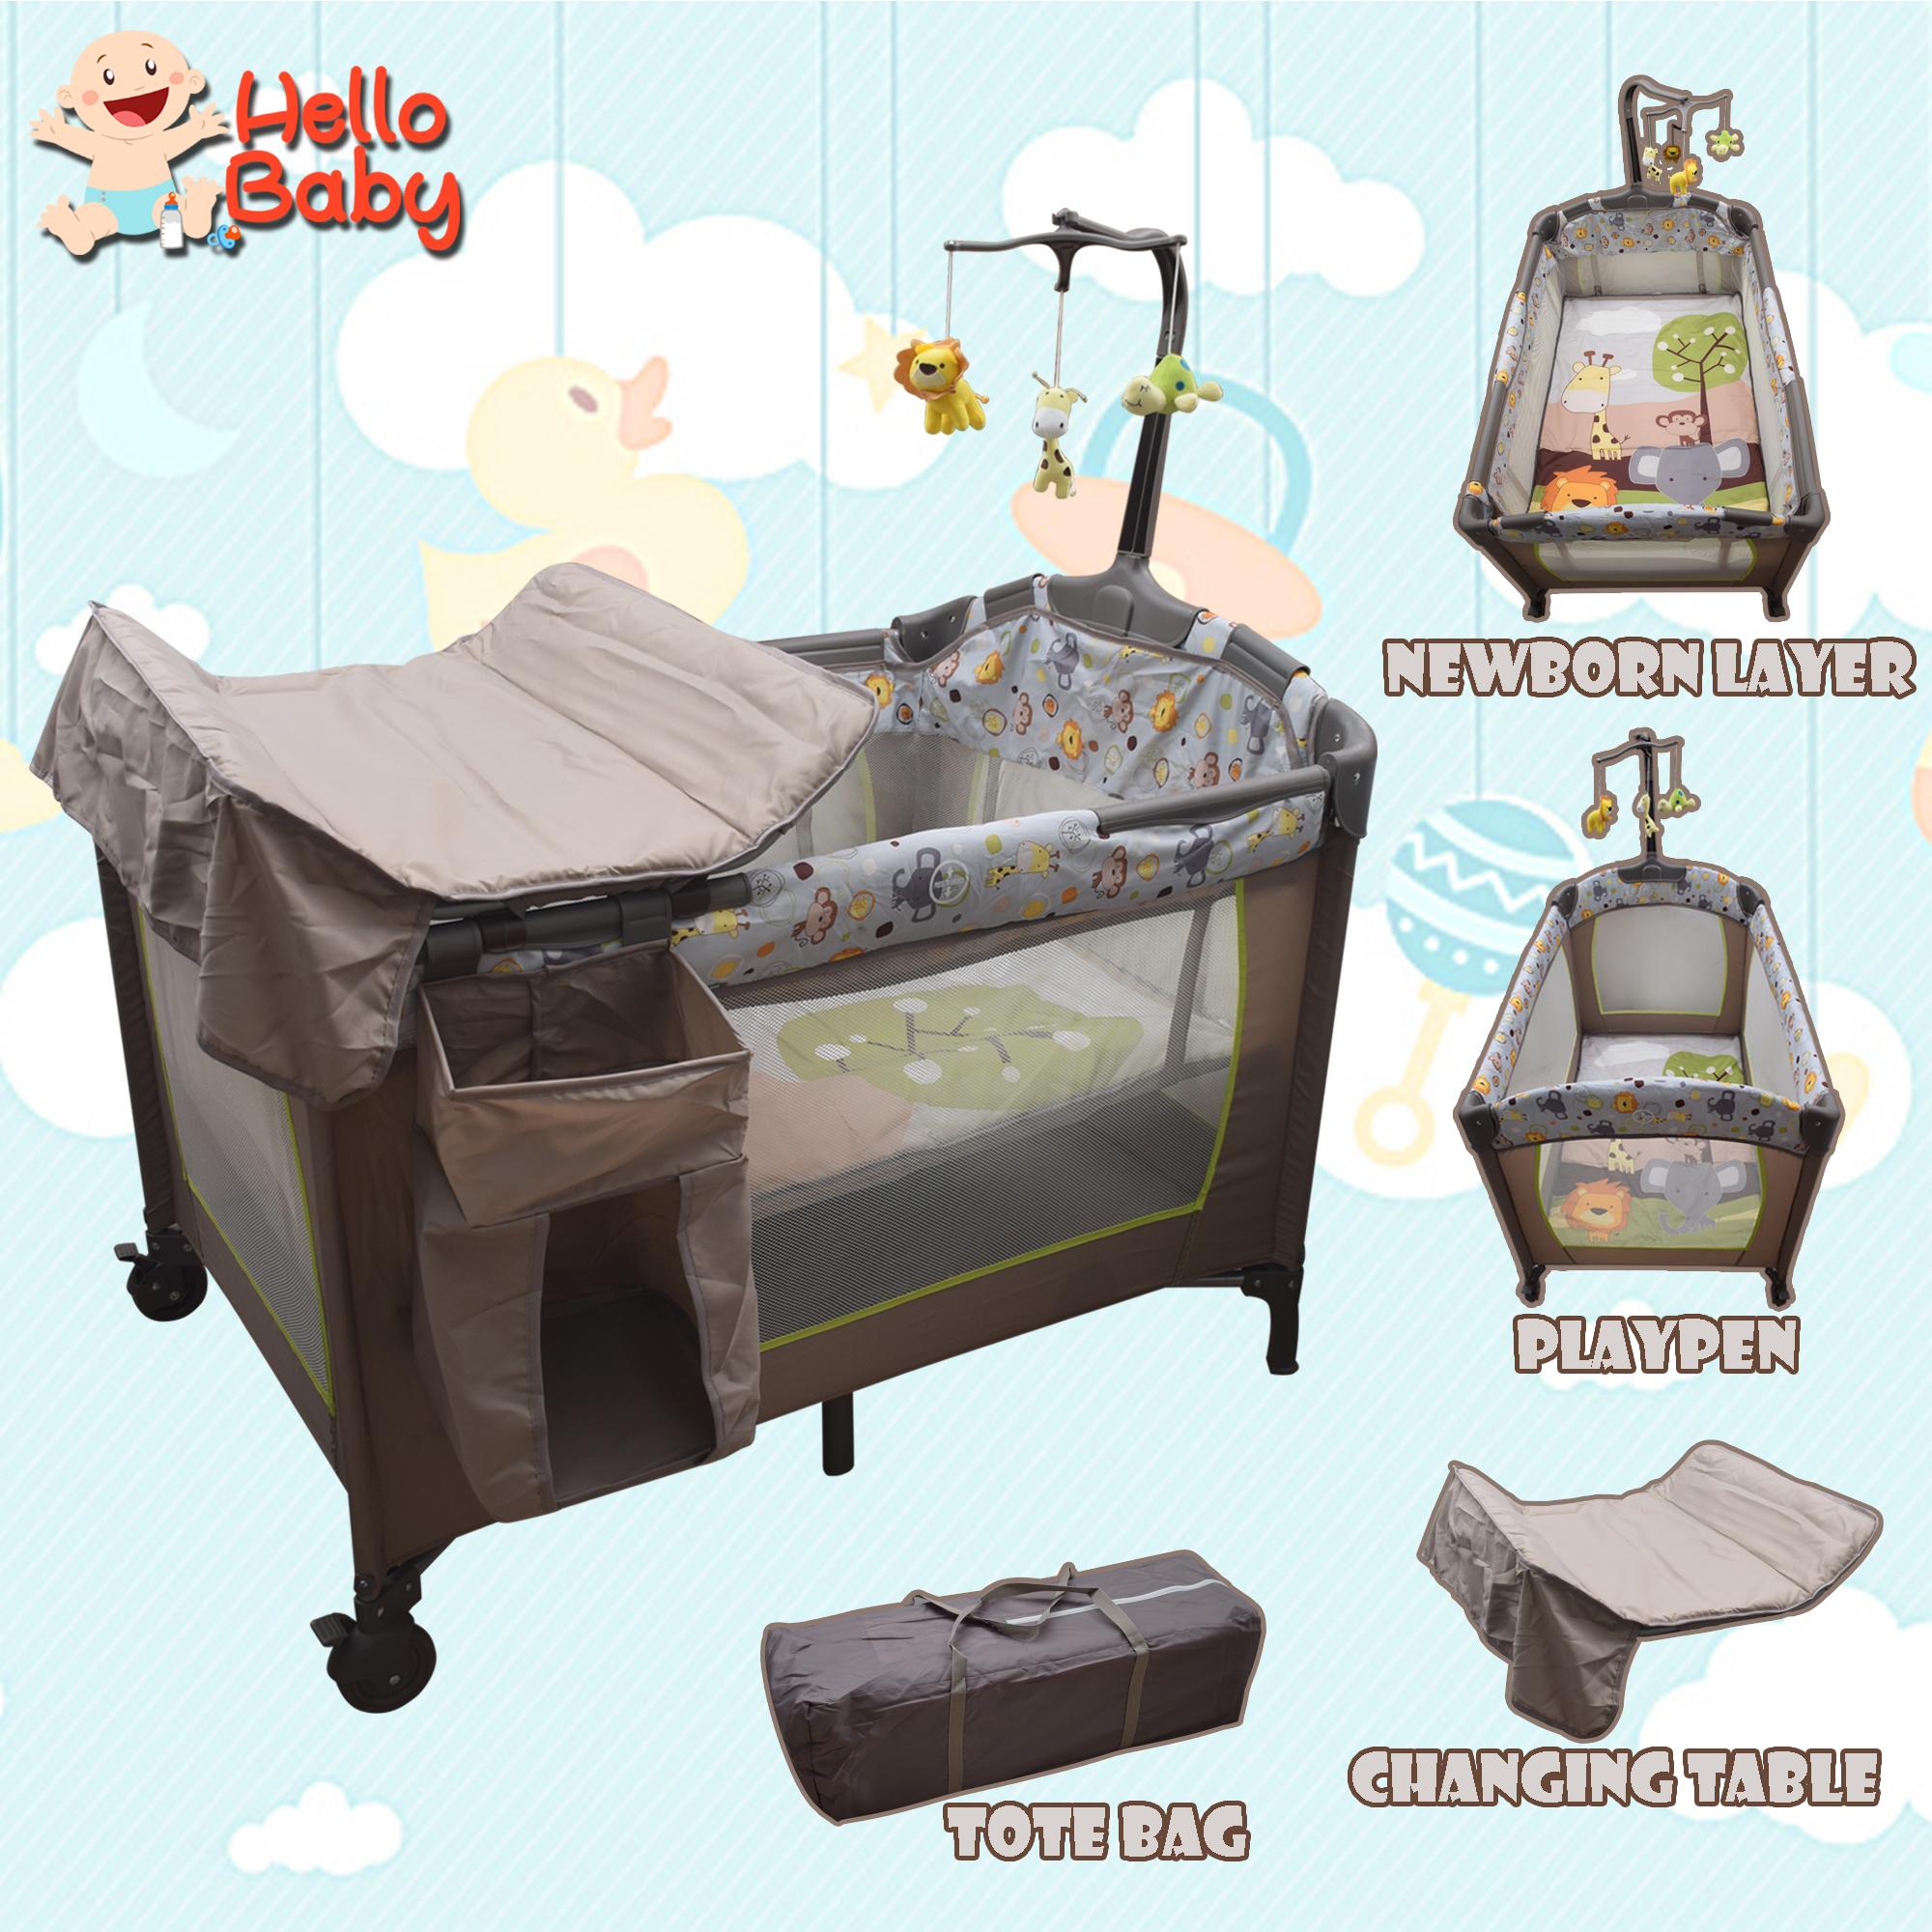 crib for baby price